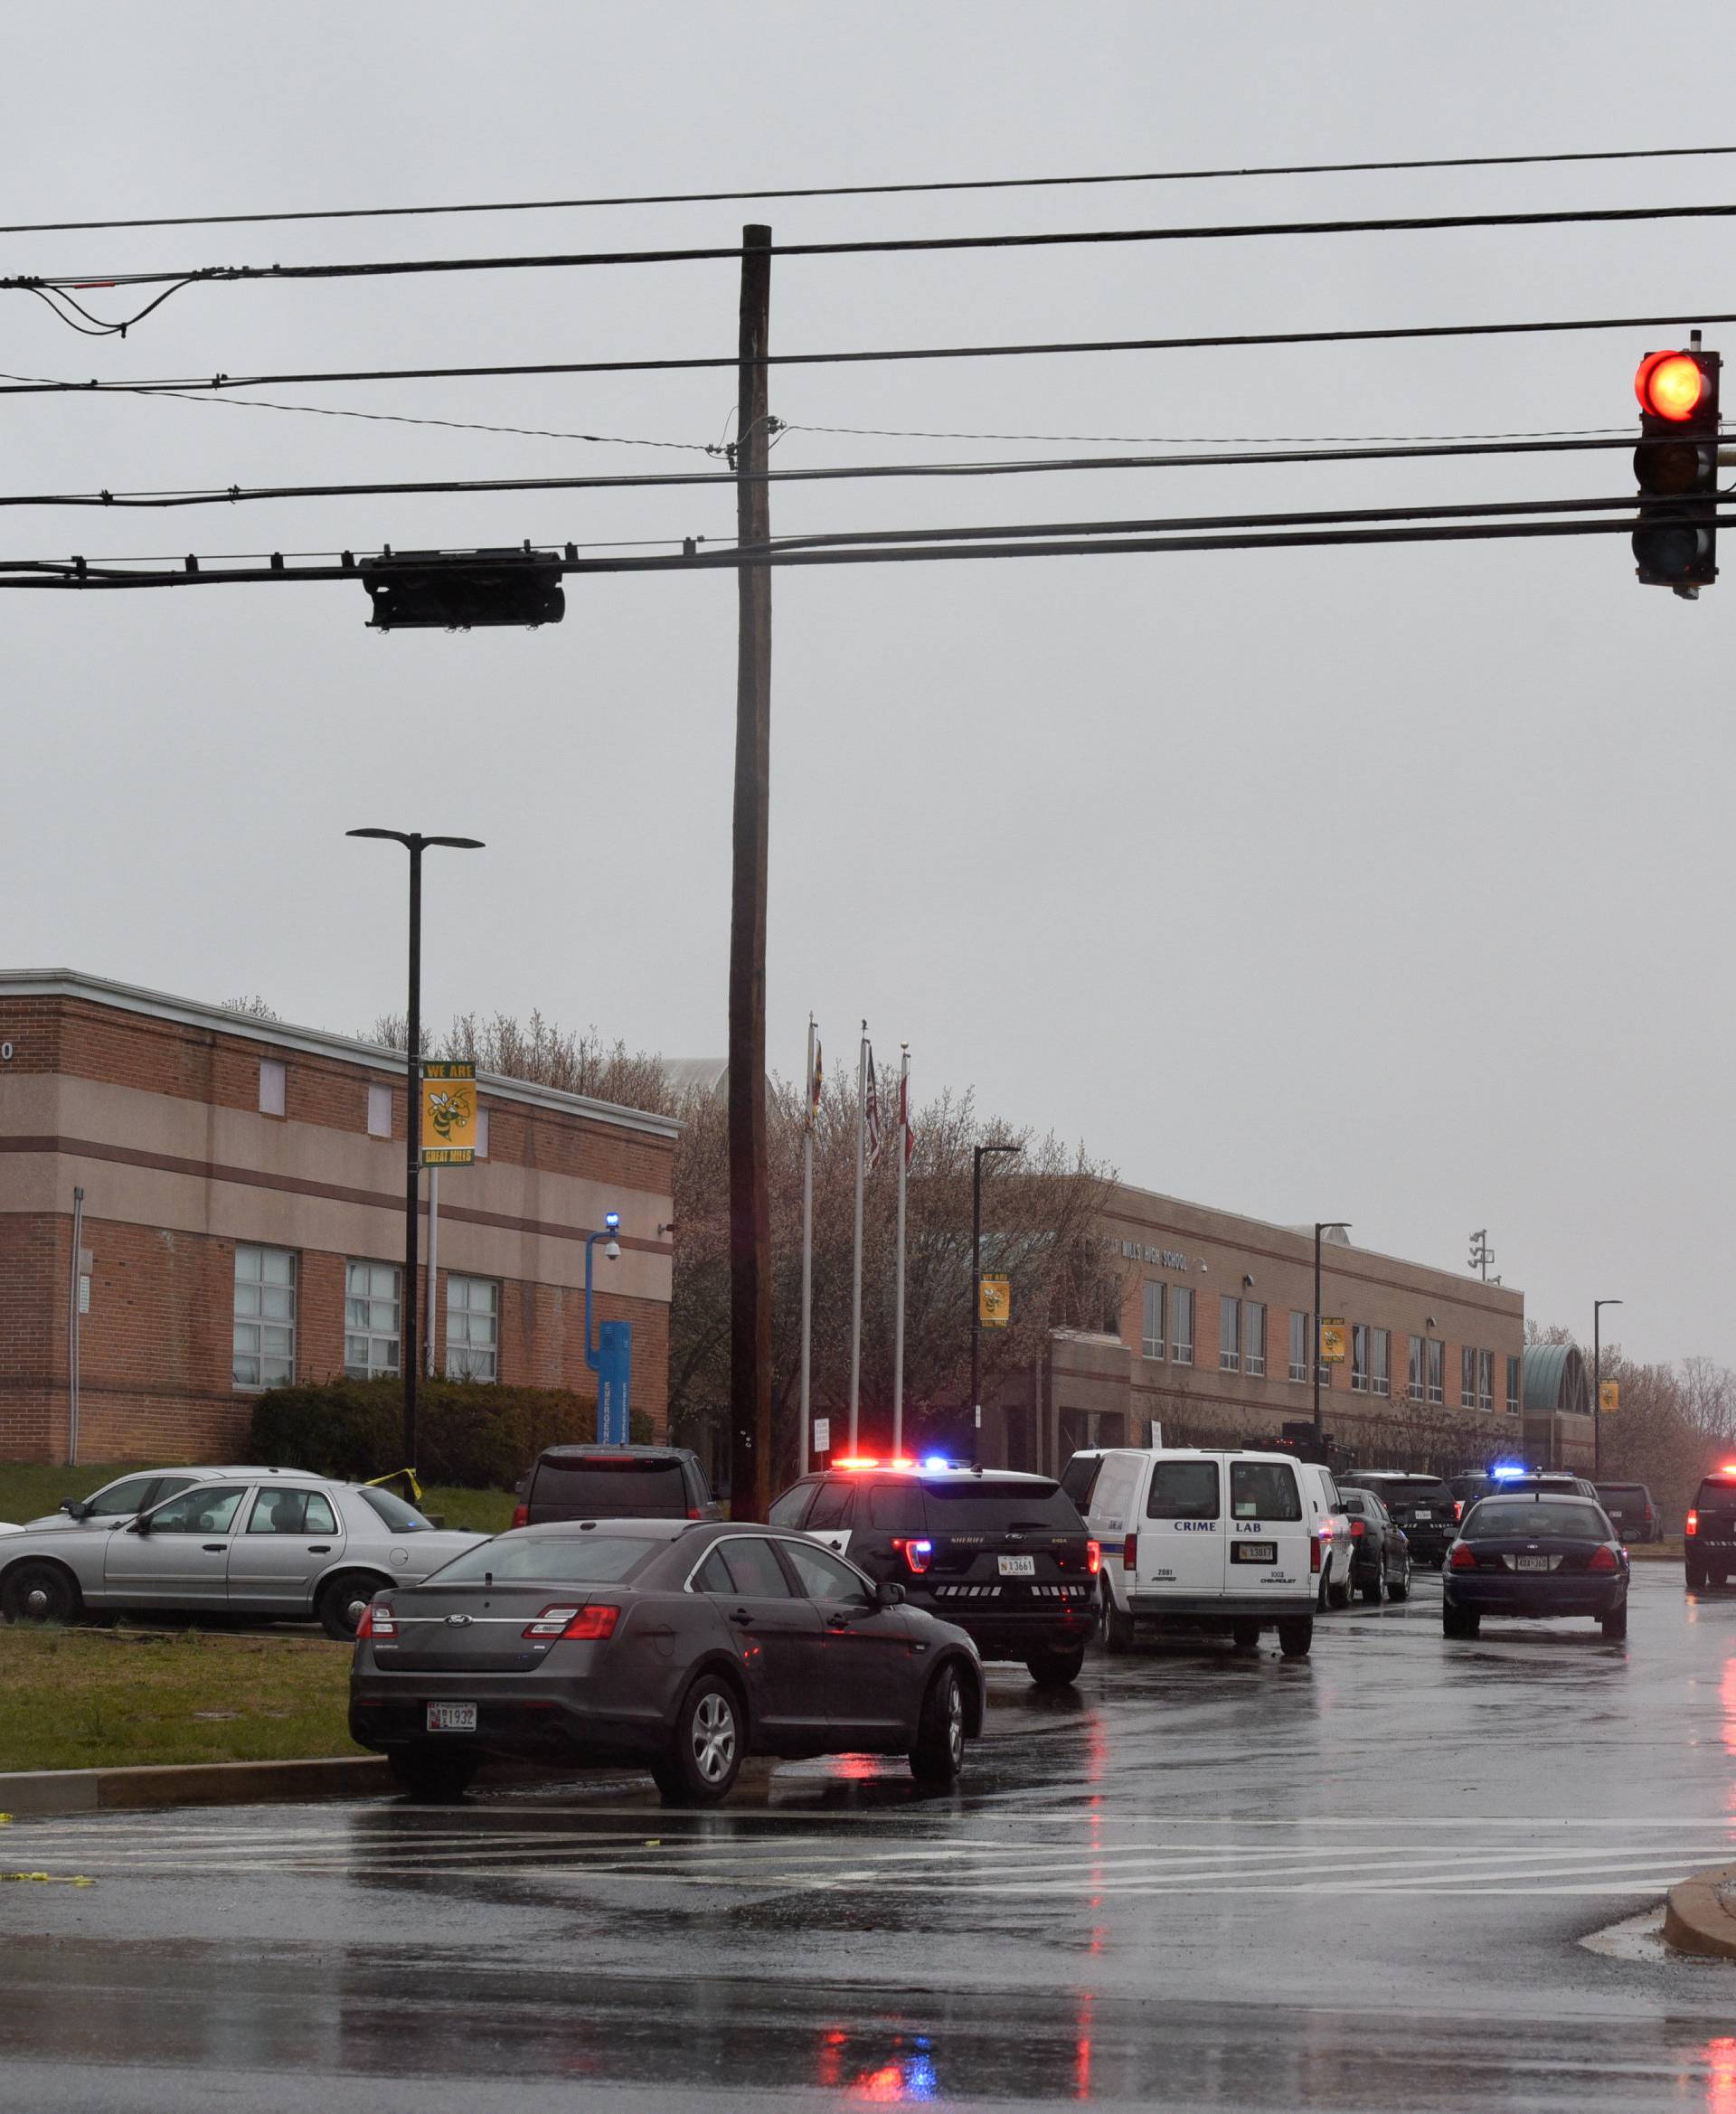 Emergency services and law enforcement vehicles are seen outside the Great Mills High School following a shooting on Tuesday morning in St. Mary's County, Maryland